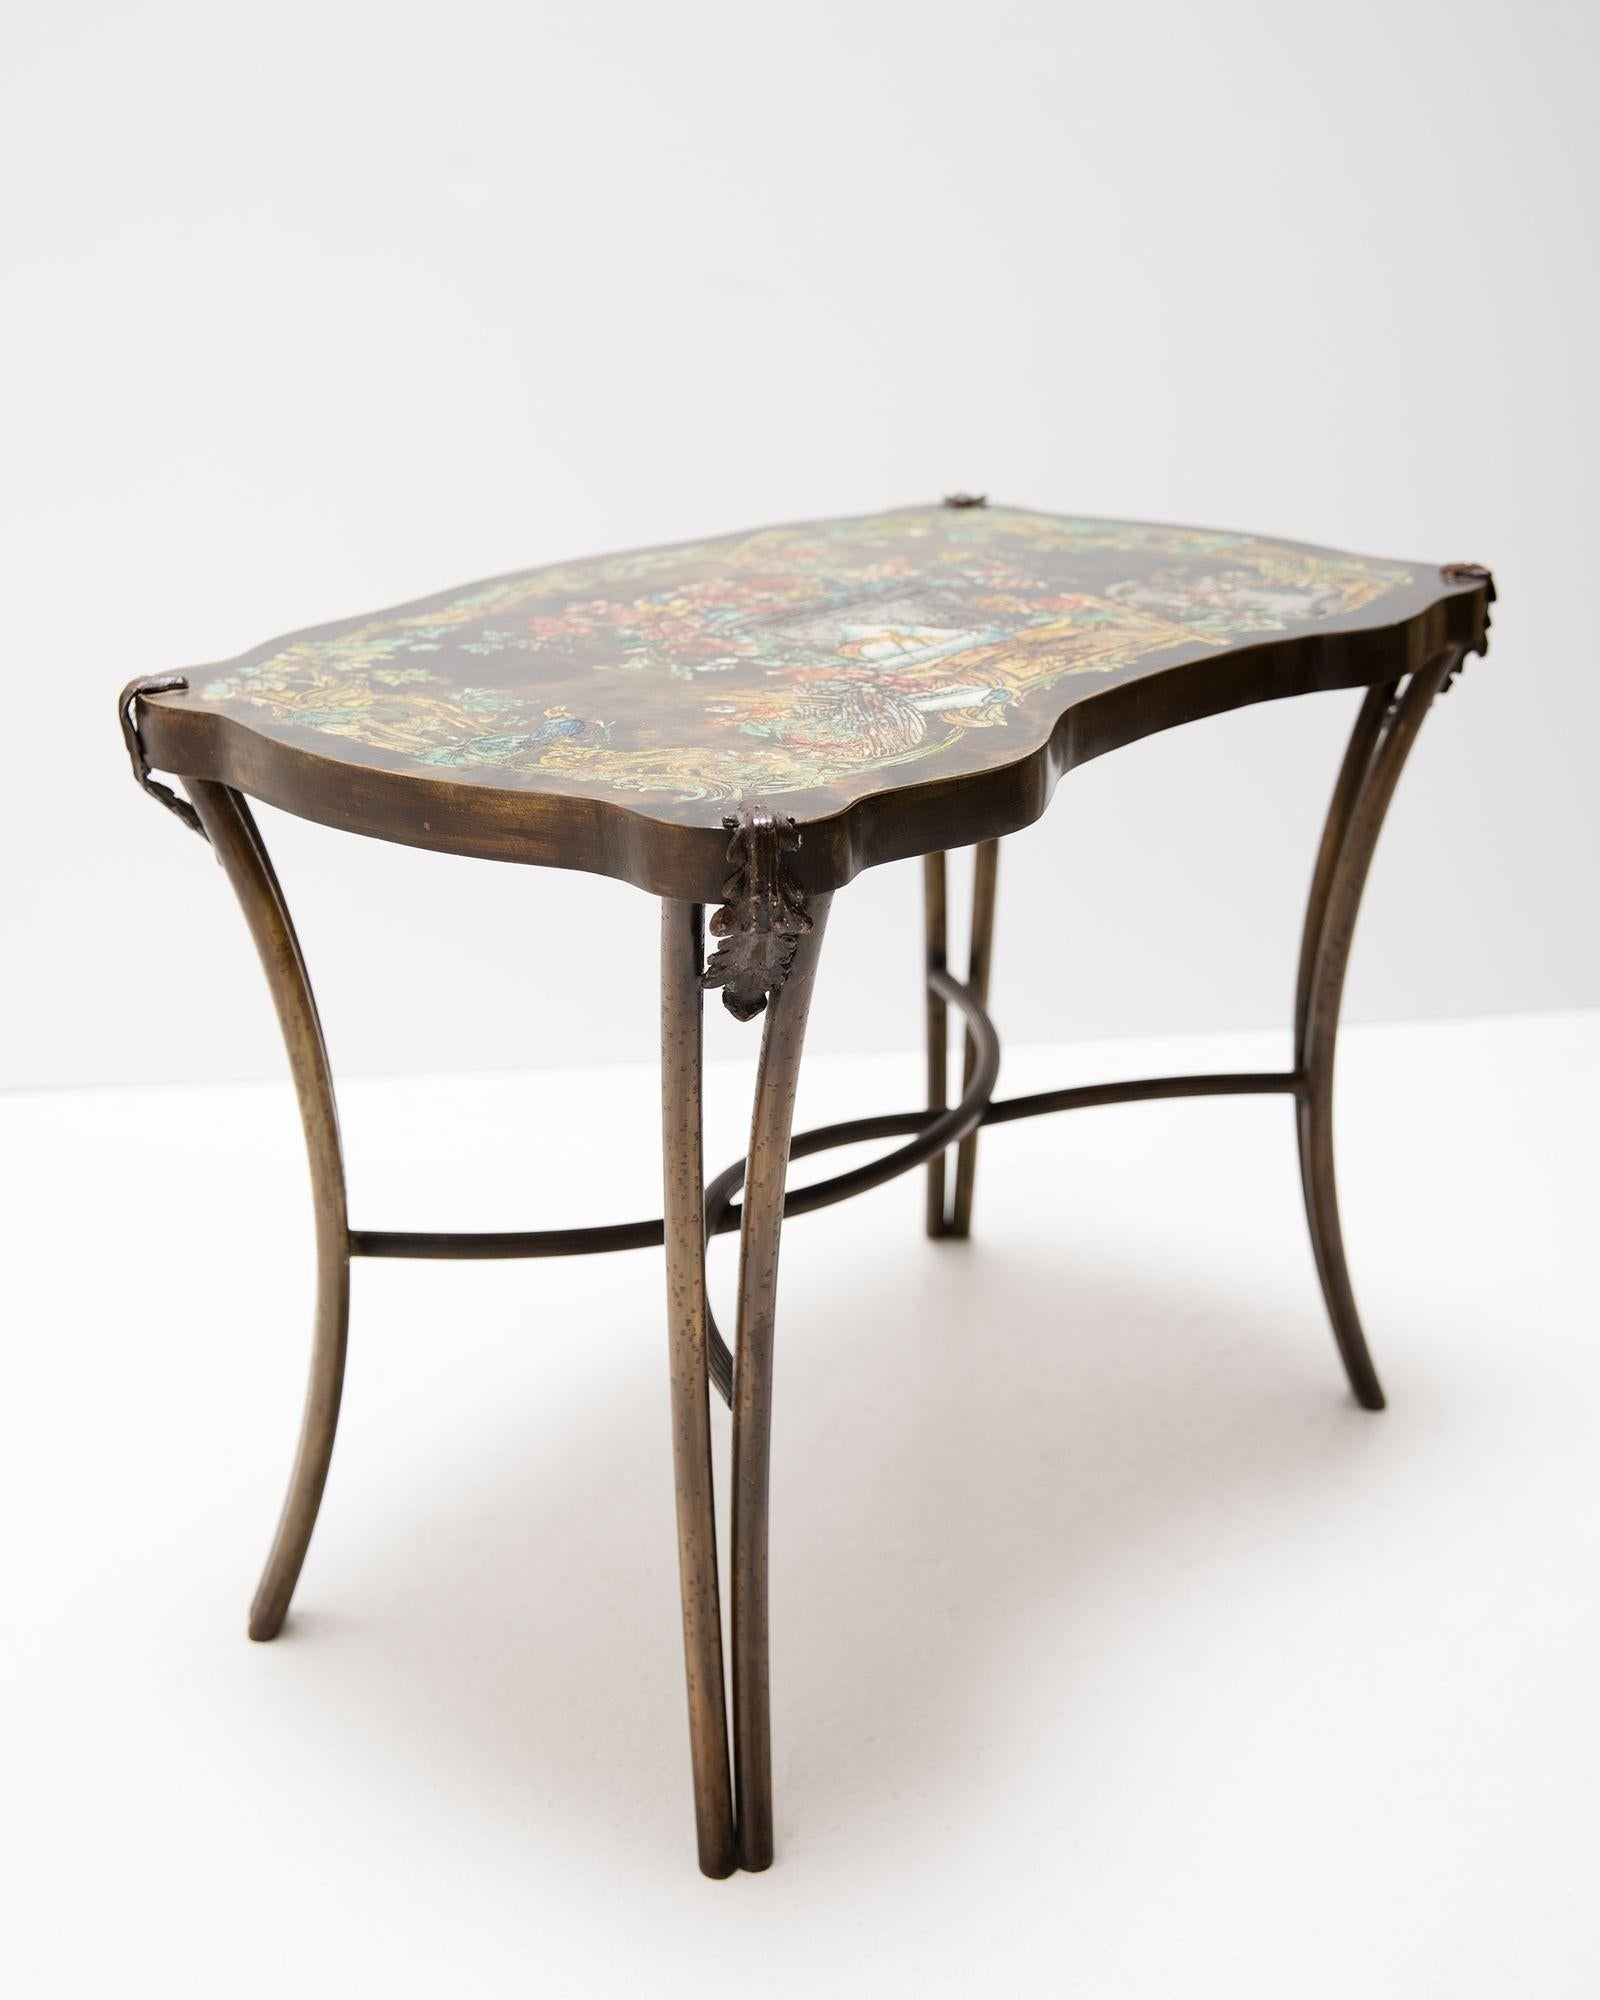 Unusual Philip and Kelvin LaVerne 'Madame Pompadour' occasional side table inspired by the original table of Marquise De Pompadour made in Cloisonne on bronze. This Acid-etched bronze rendition has an applied patina and hand-painted embellishments